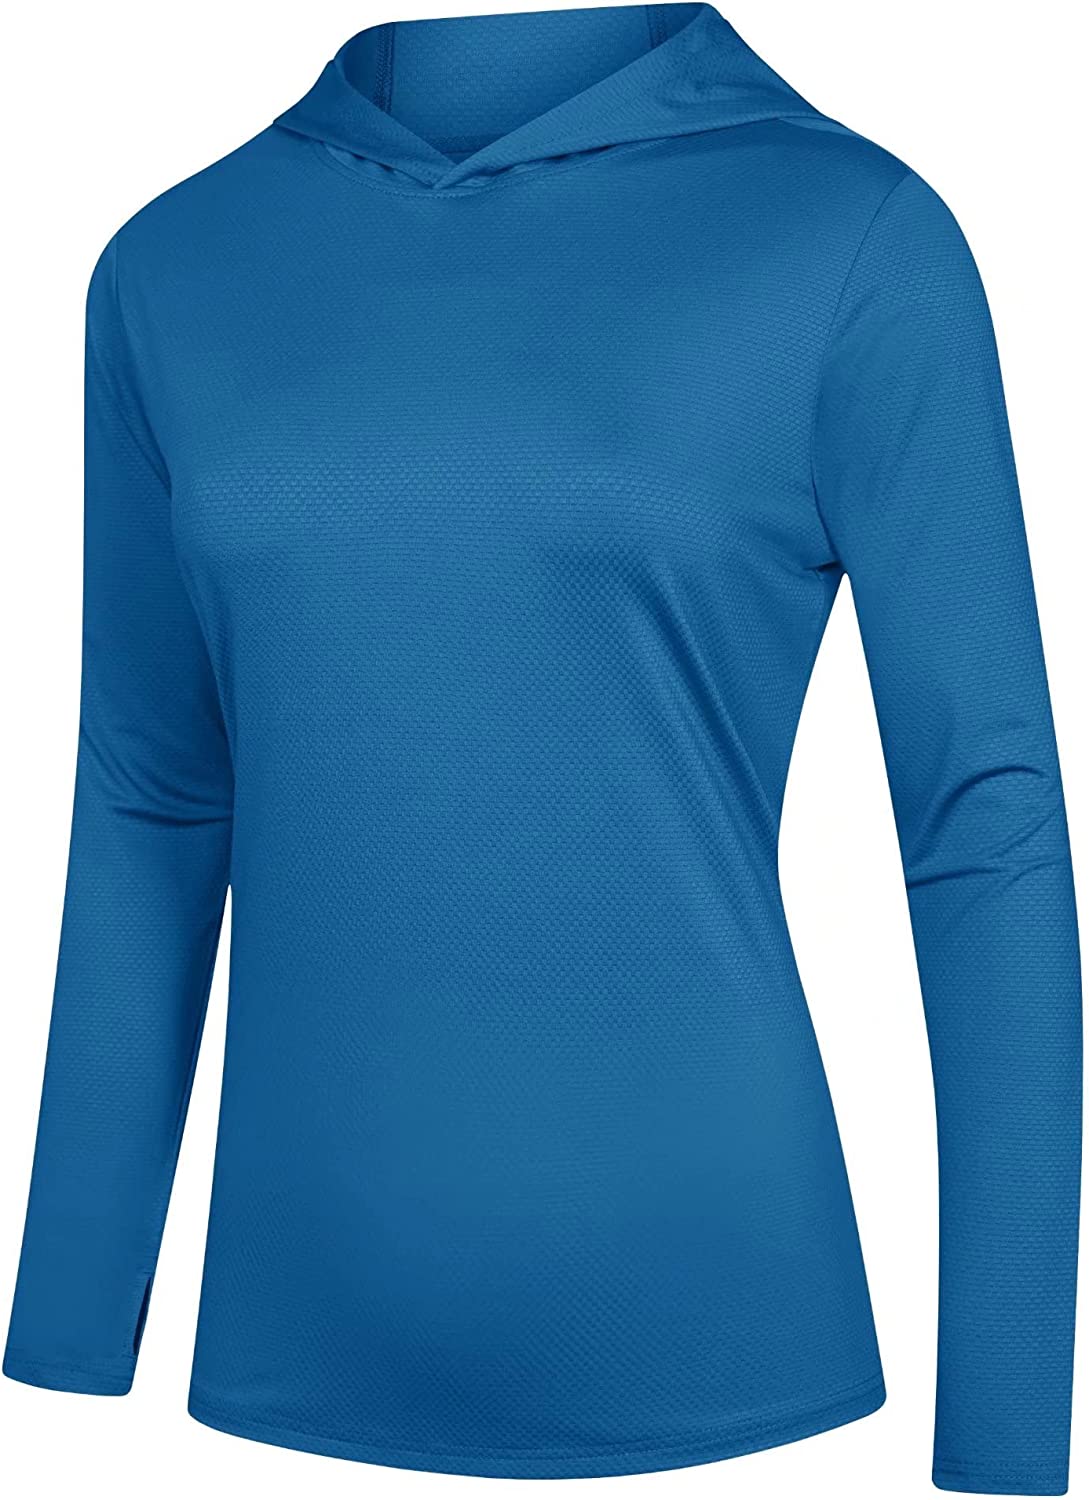  KEFITEVD Hooded Shirts for Women Long Sleeve T Shirt for Women  UV Protection Shirts Athletic Shirts Fishing Shirt Hoodies for Women Beach  Shirts for Women Apricot : Clothing, Shoes & Jewelry